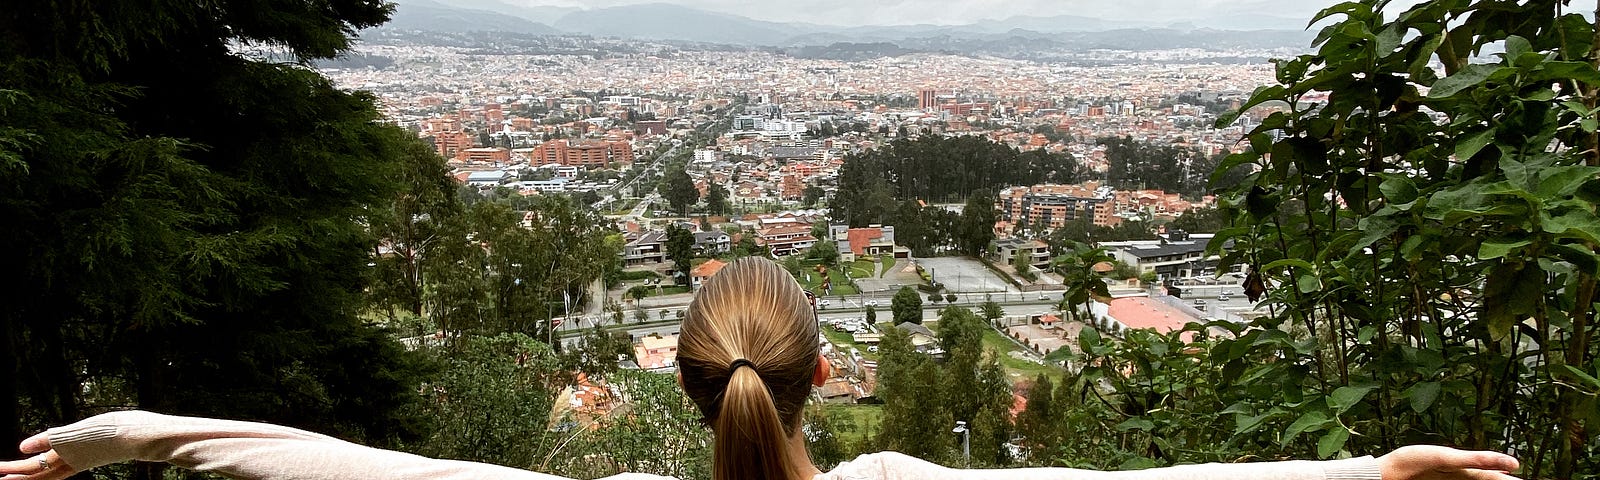 Woman standing with arms spread. The city of Cuenca is in the distance nestled amongst lush green trees and mountains.